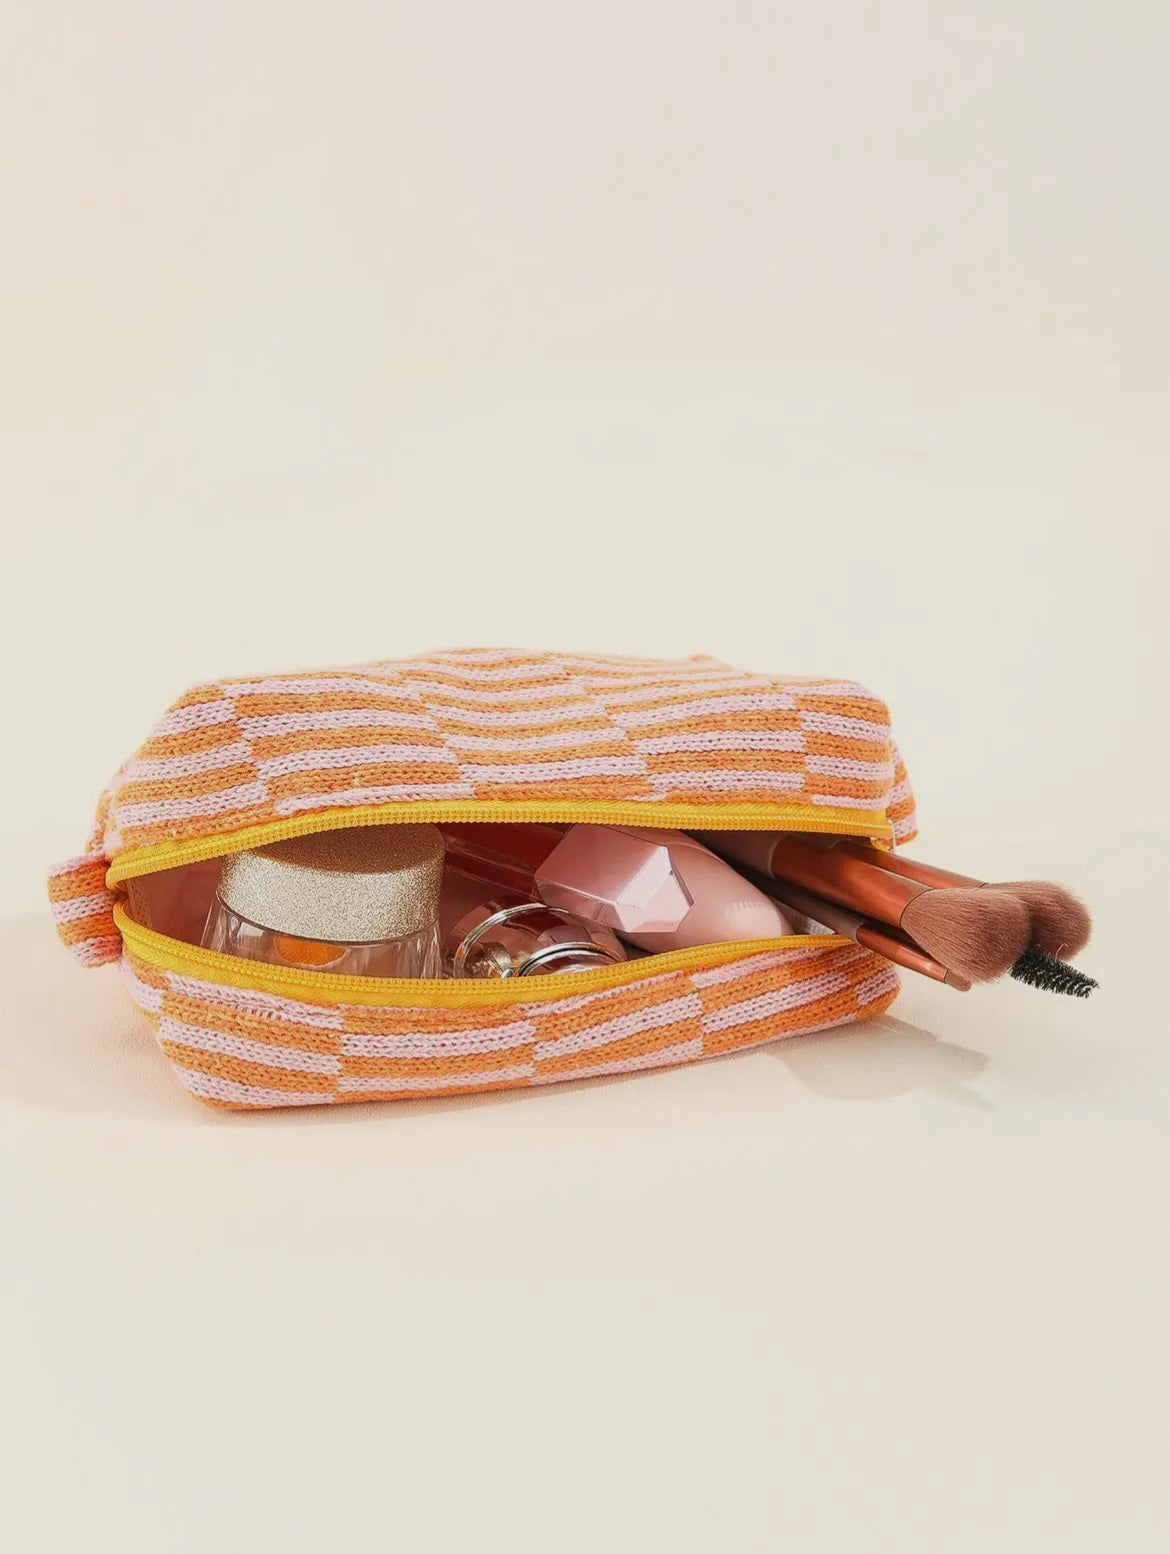 Small Cosmetic Pouch